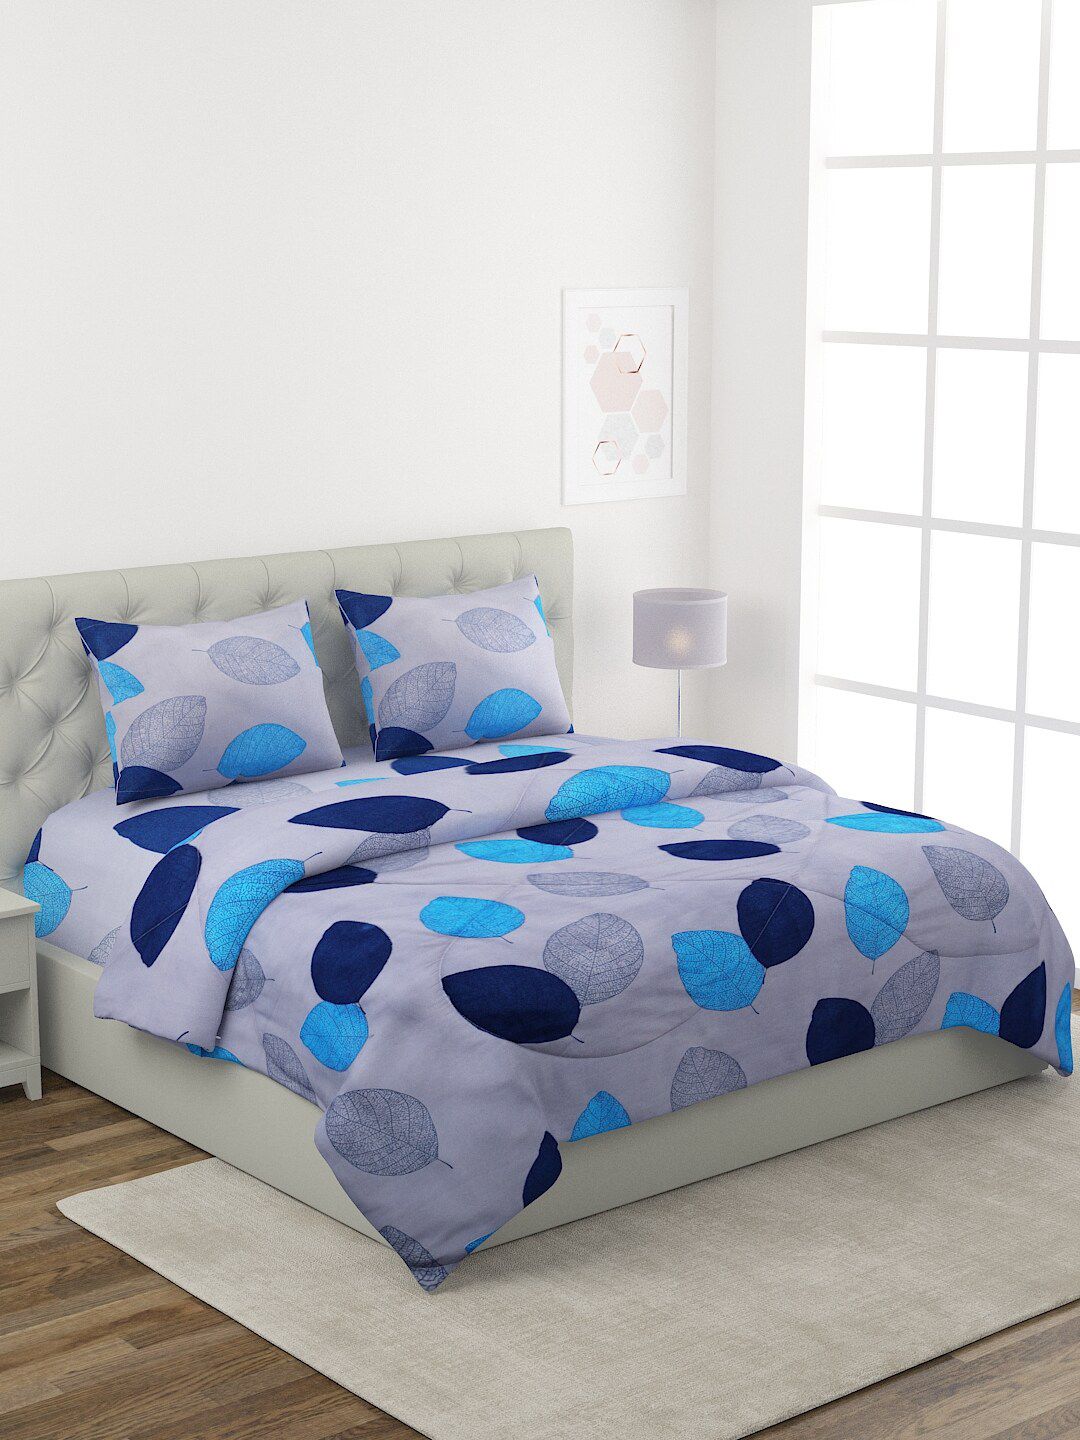 ROMEE Grey & Blue Printed Pure Cotton Double King  Bedding Set Price in India